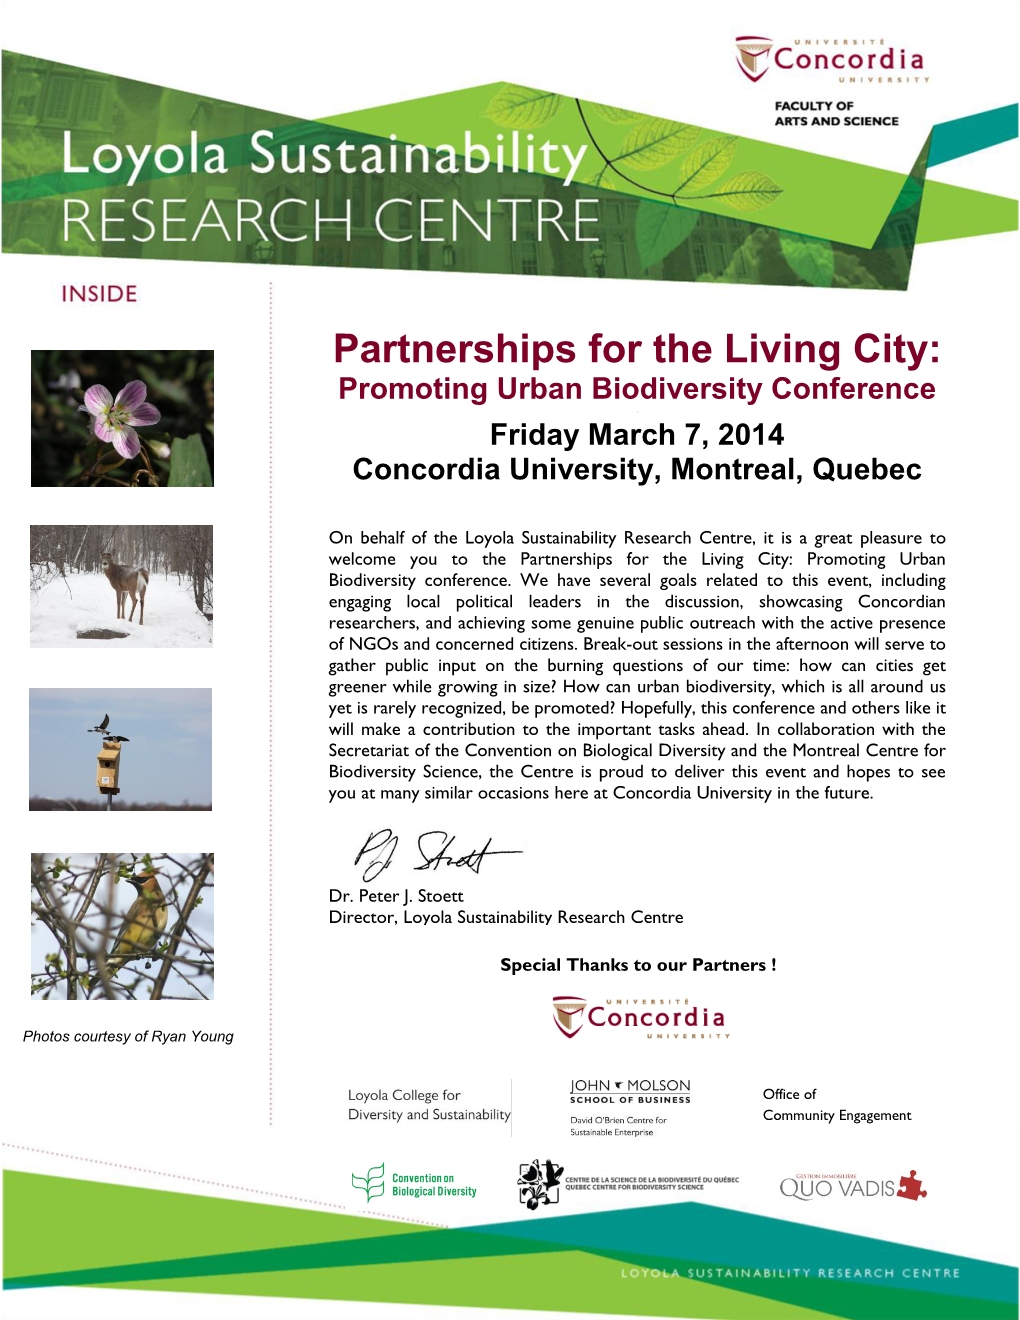 Partnerships for the Living City: Promoting Urban Biodiversity Conference